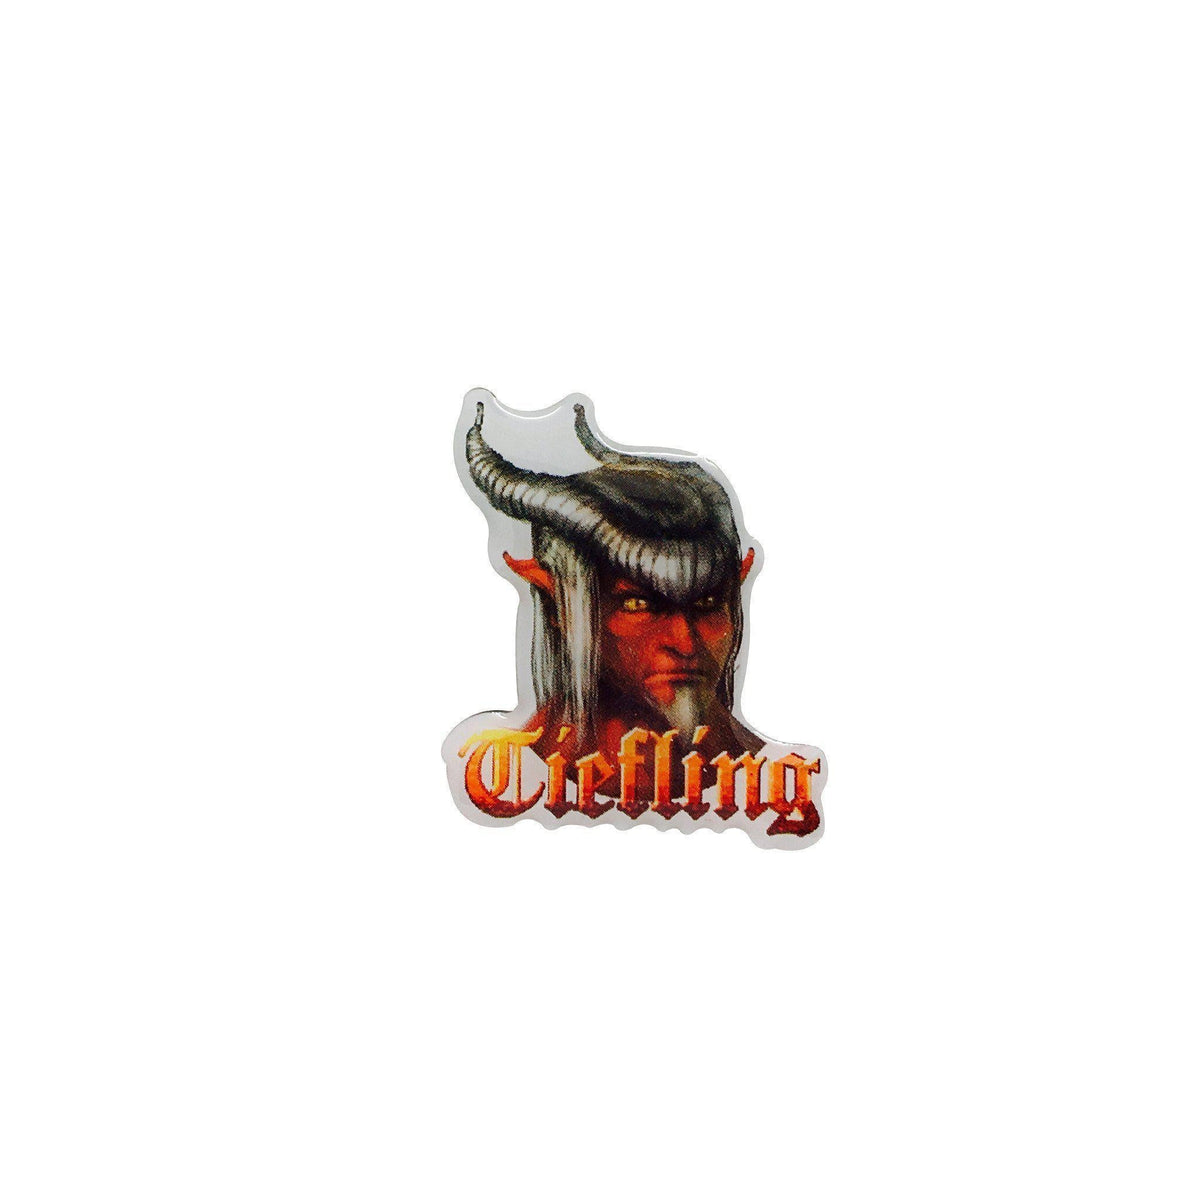 Tiefling – Adventure Pin Metal by Norse Foundry - 610074994824